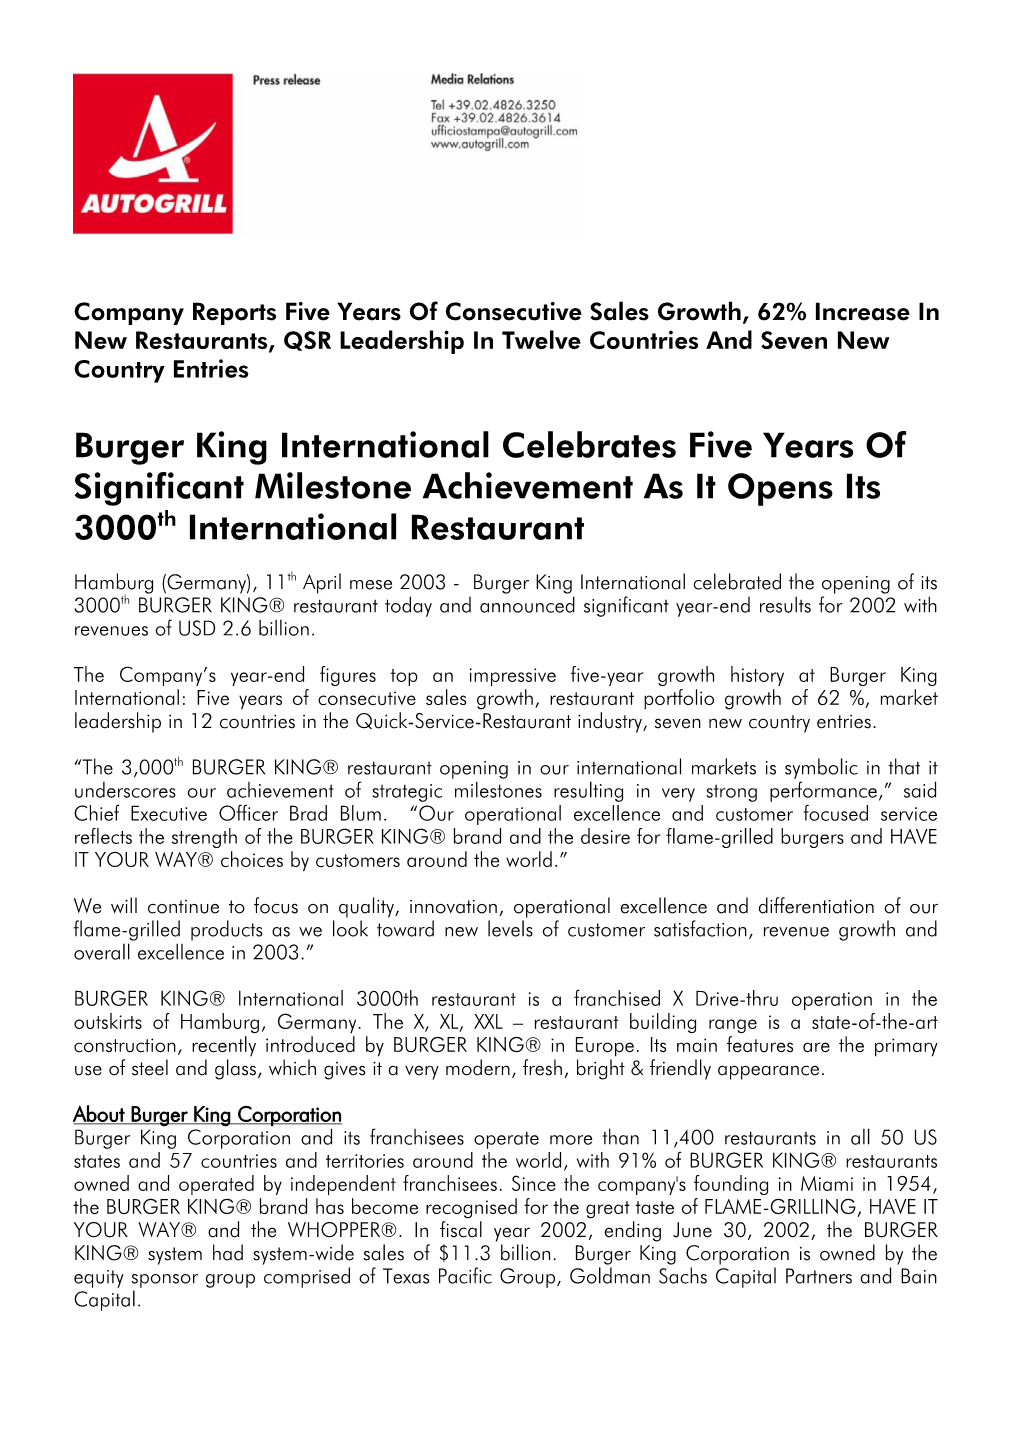 Burger King International Celebrates Five Years of Significant Milestone Achievement As It Opens Its 3000Th International Restaurant